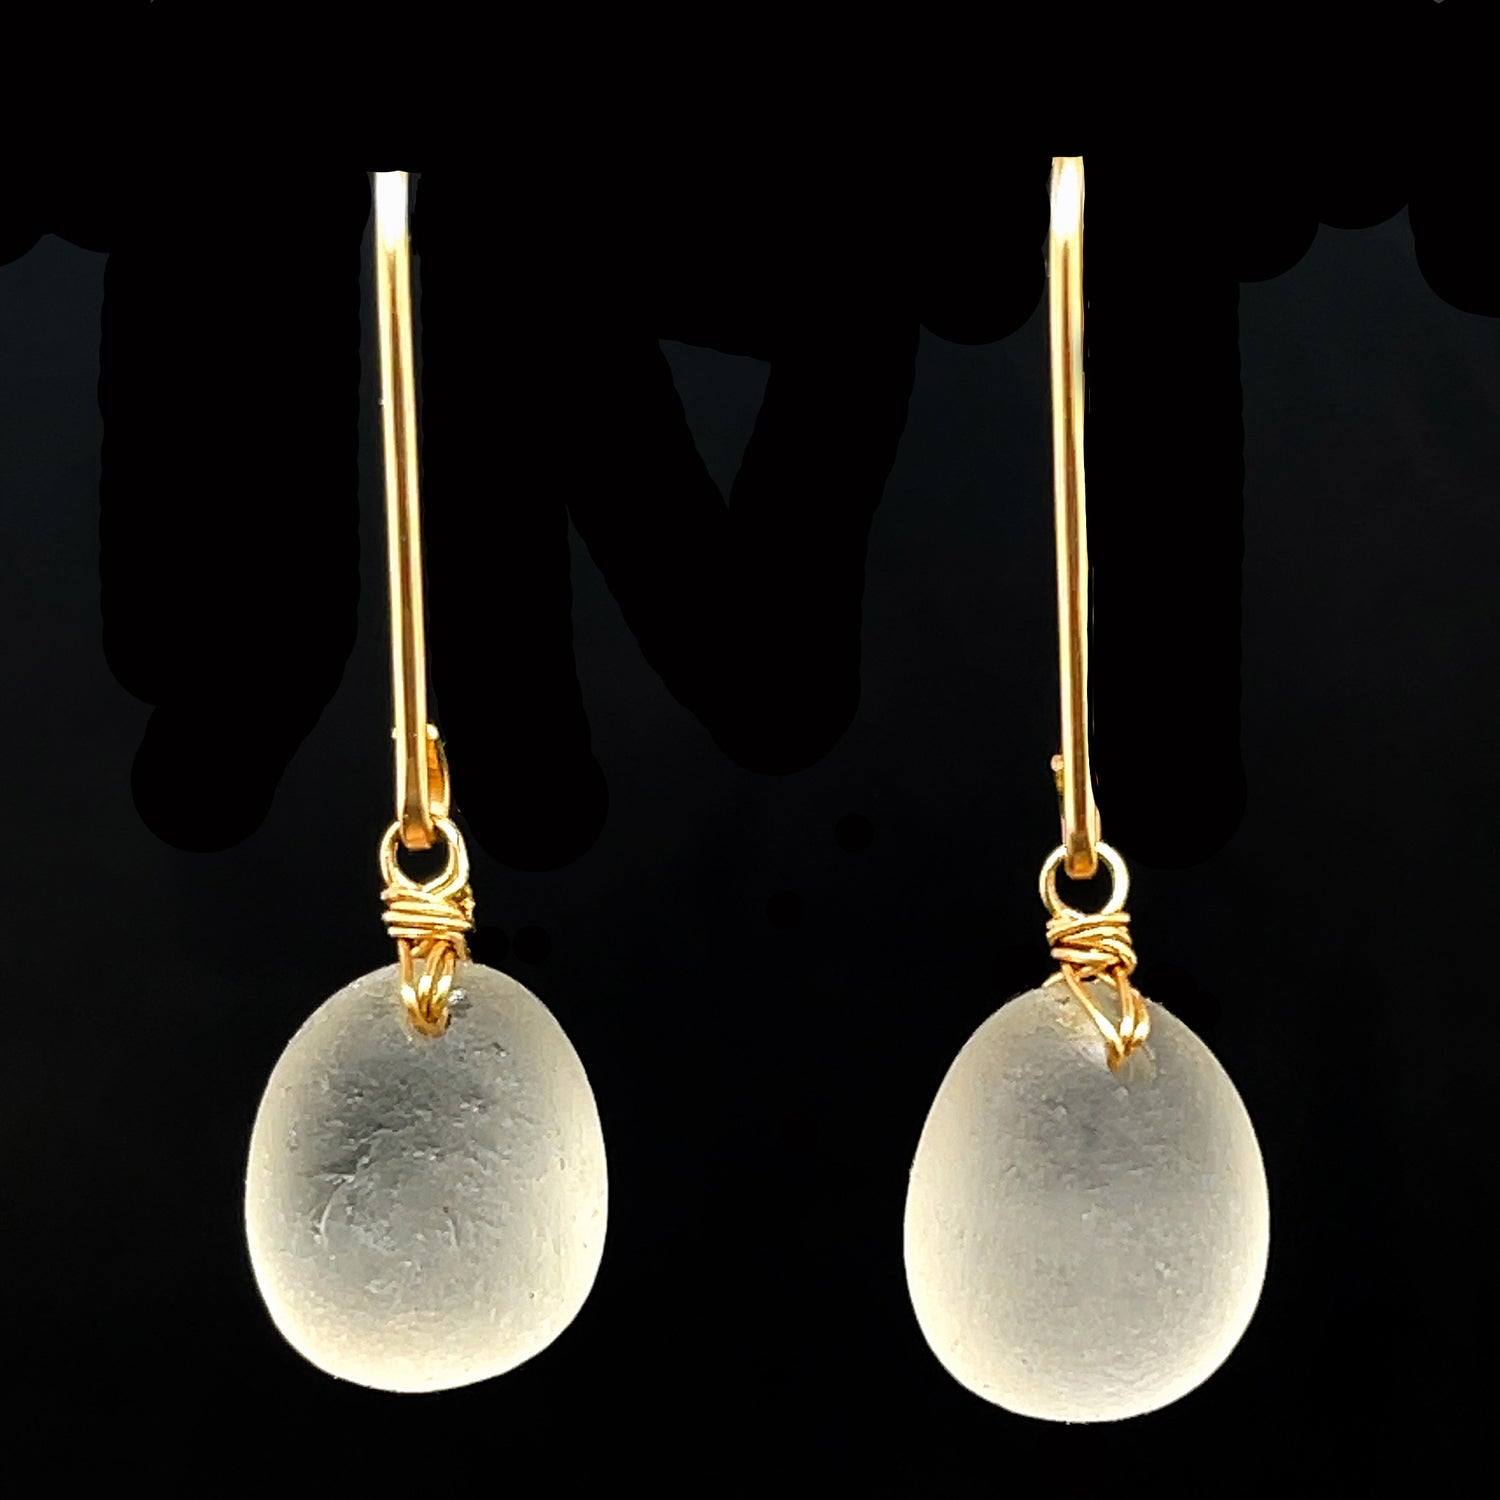 Unique Clear Sea Glass Earrings featuring natural textures and gold accents, perfect for any occasion